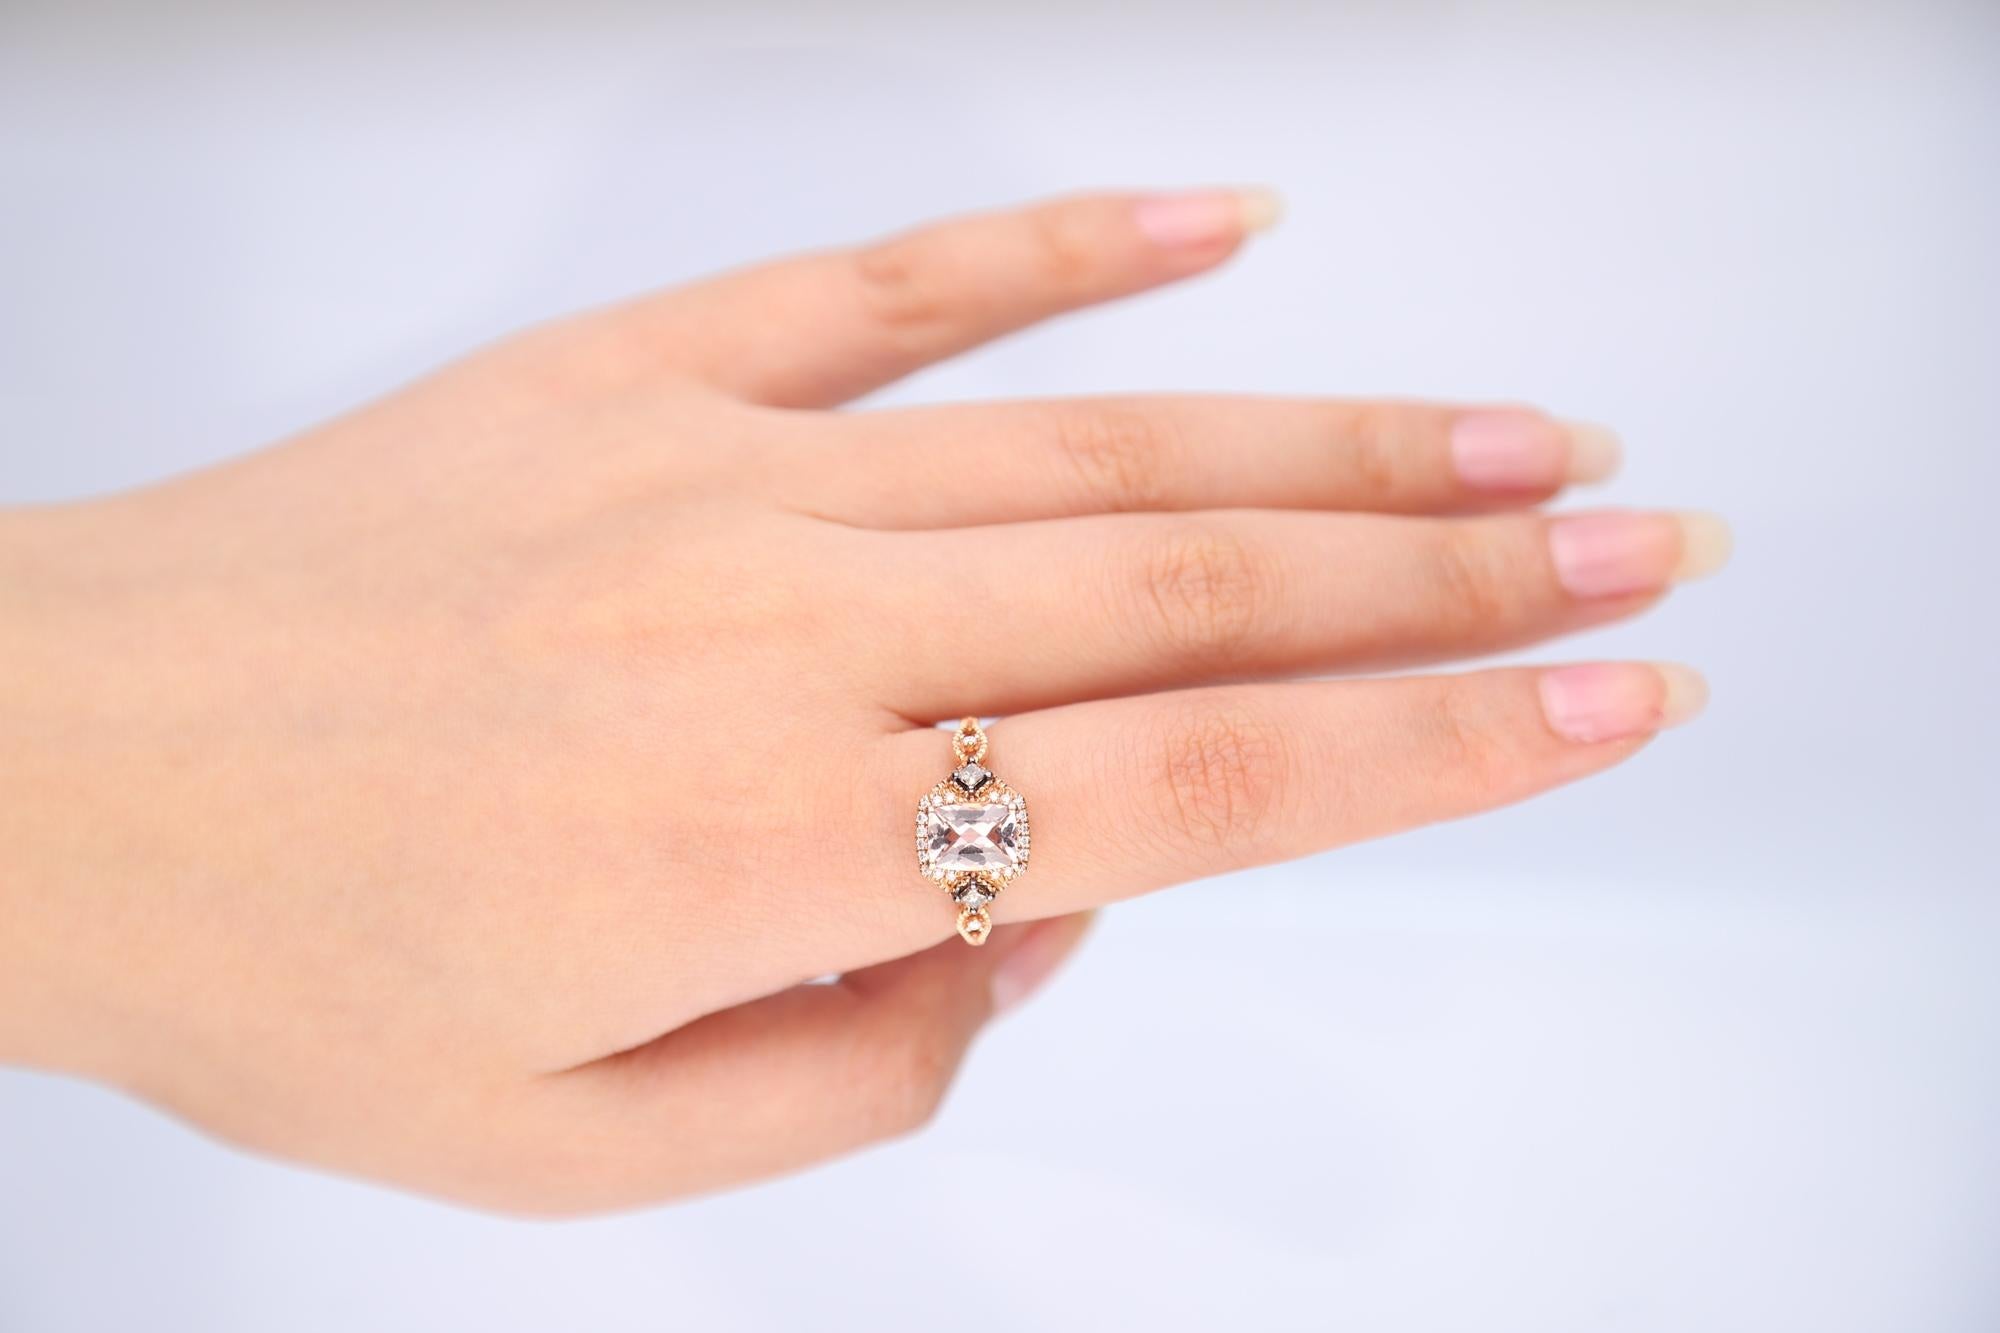 Stunning, timeless and classy eternity Unique Ring. Decorate yourself in luxury with this Gin & Grace Ring. The 14K Rose Gold jewelry boasts with Cushion-cut 1 pcs 1.28 carat Morganite and Natural Round-cut white Diamond (22 Pcs) 0.12 Carat accent